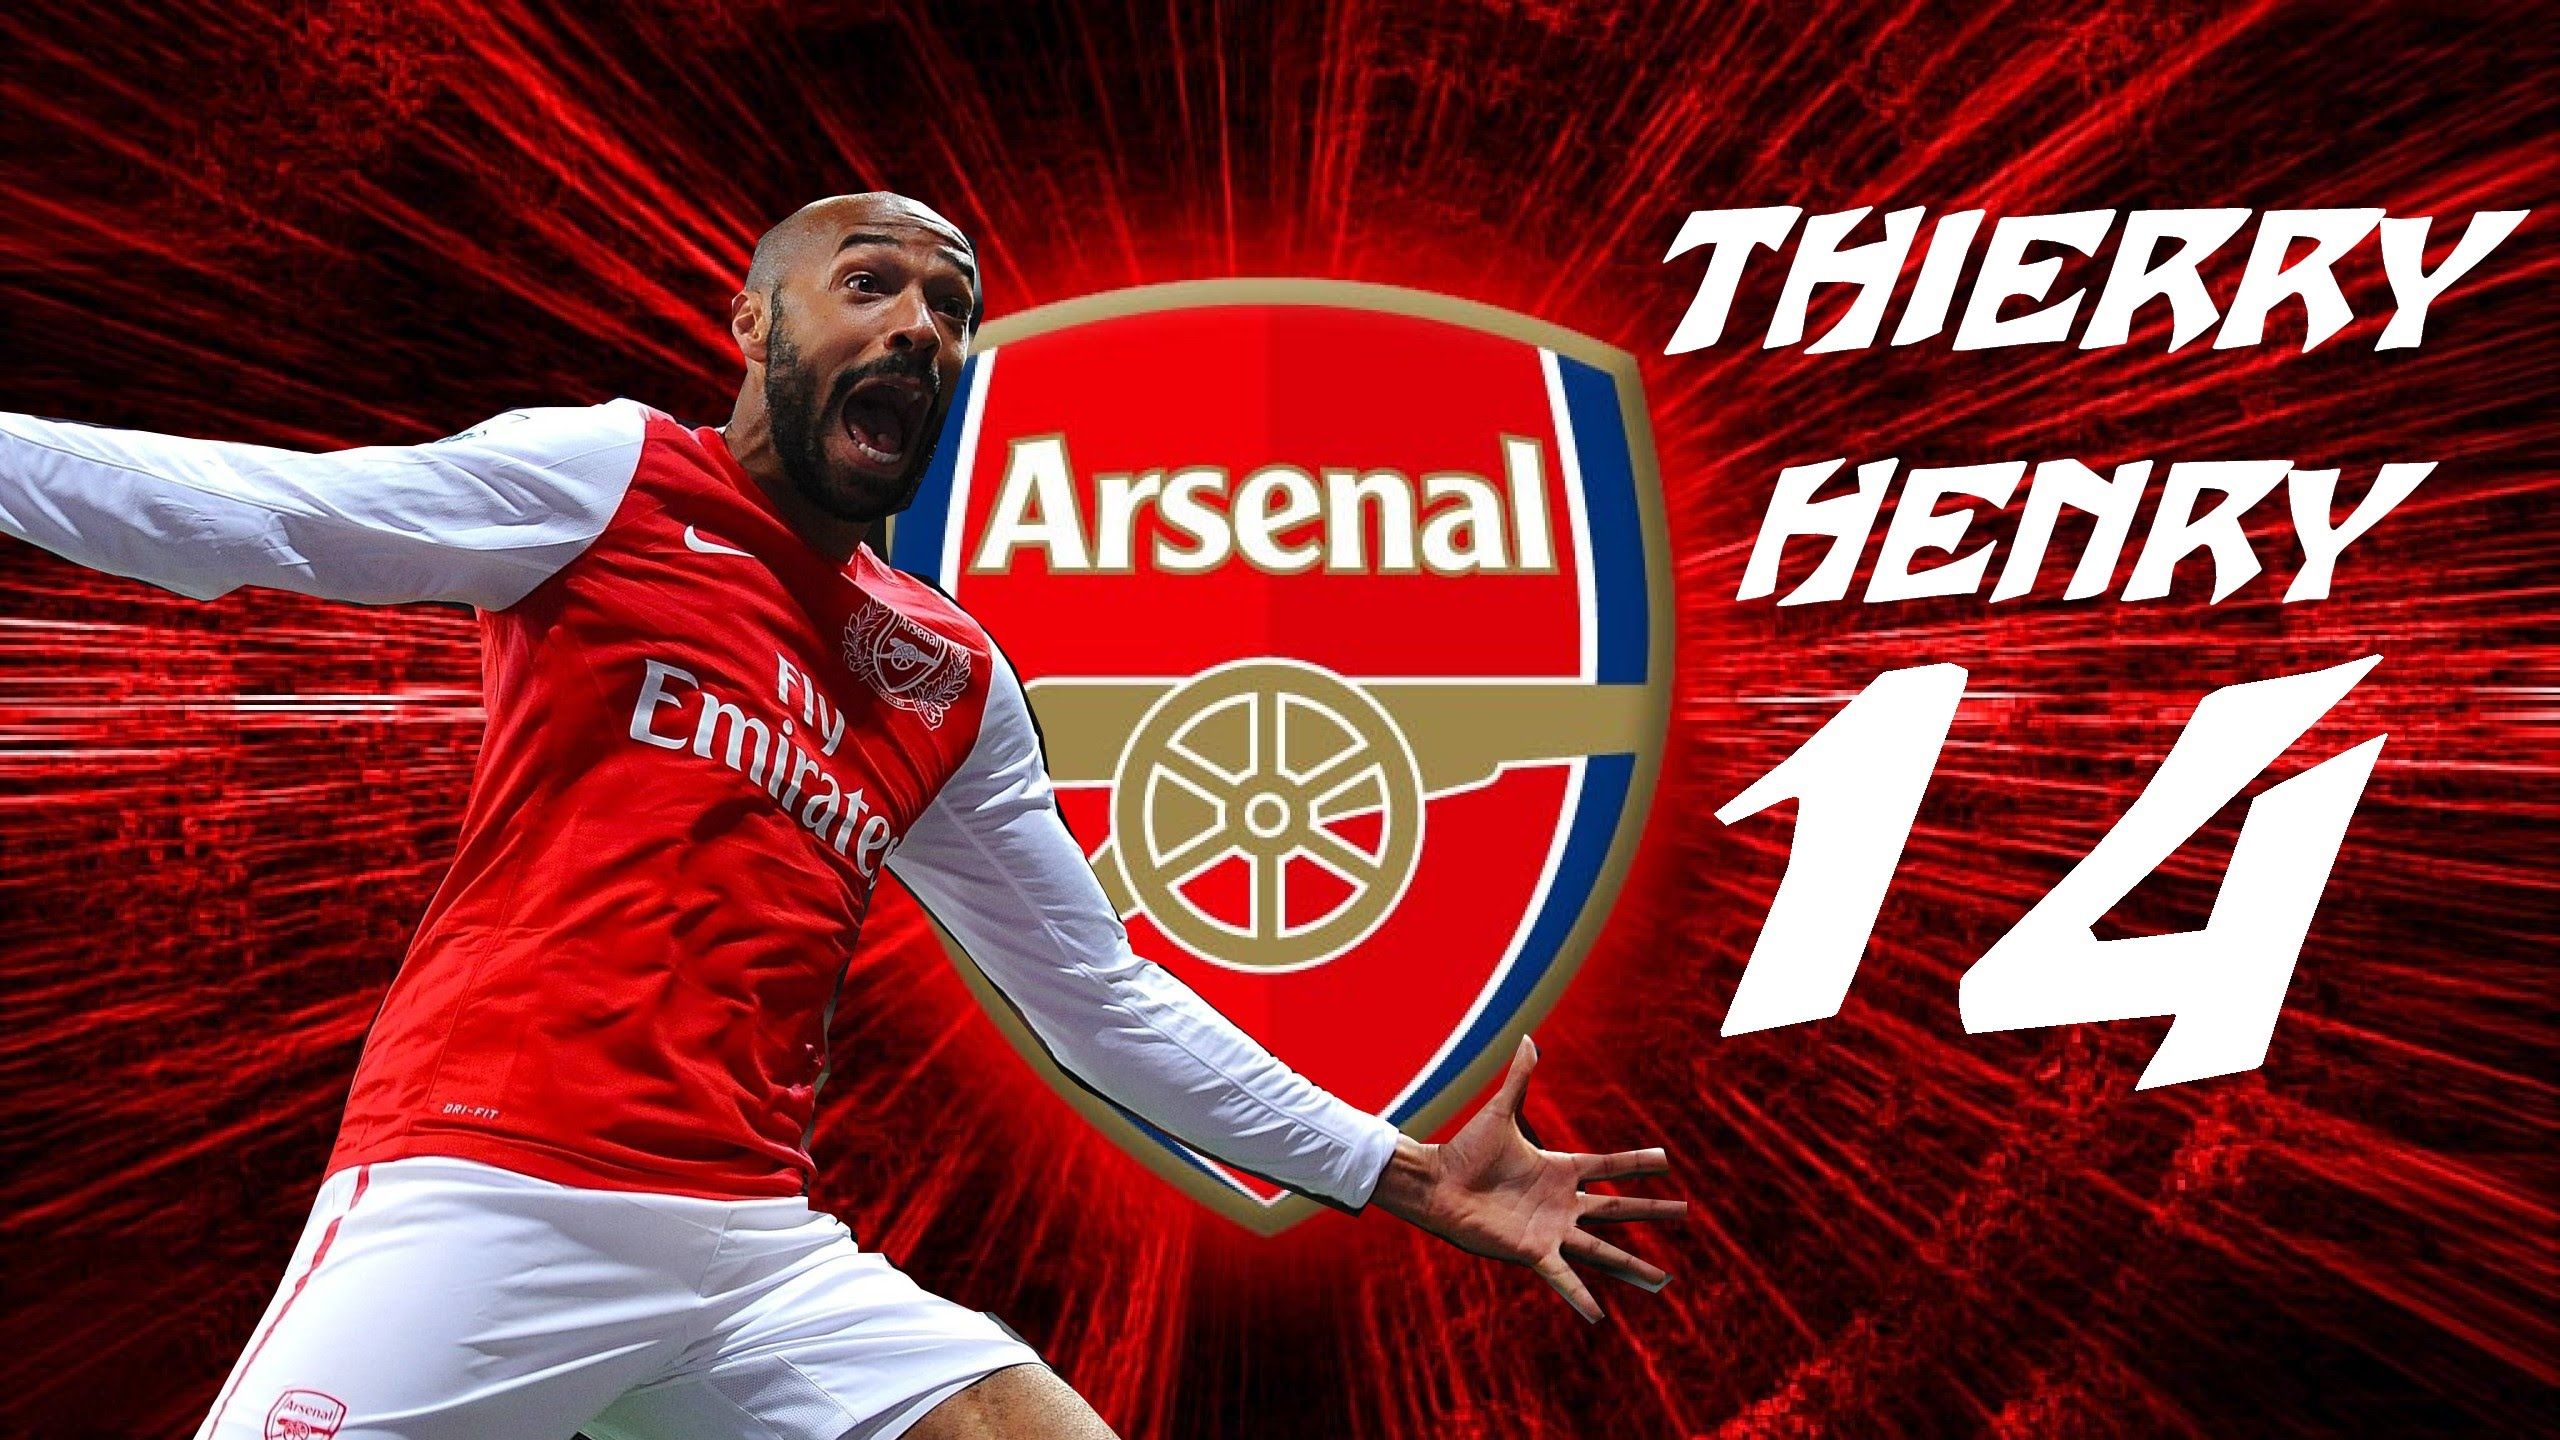 Arsenal Thierry Henry Desktop Wallpapers - Wallpaper Cave